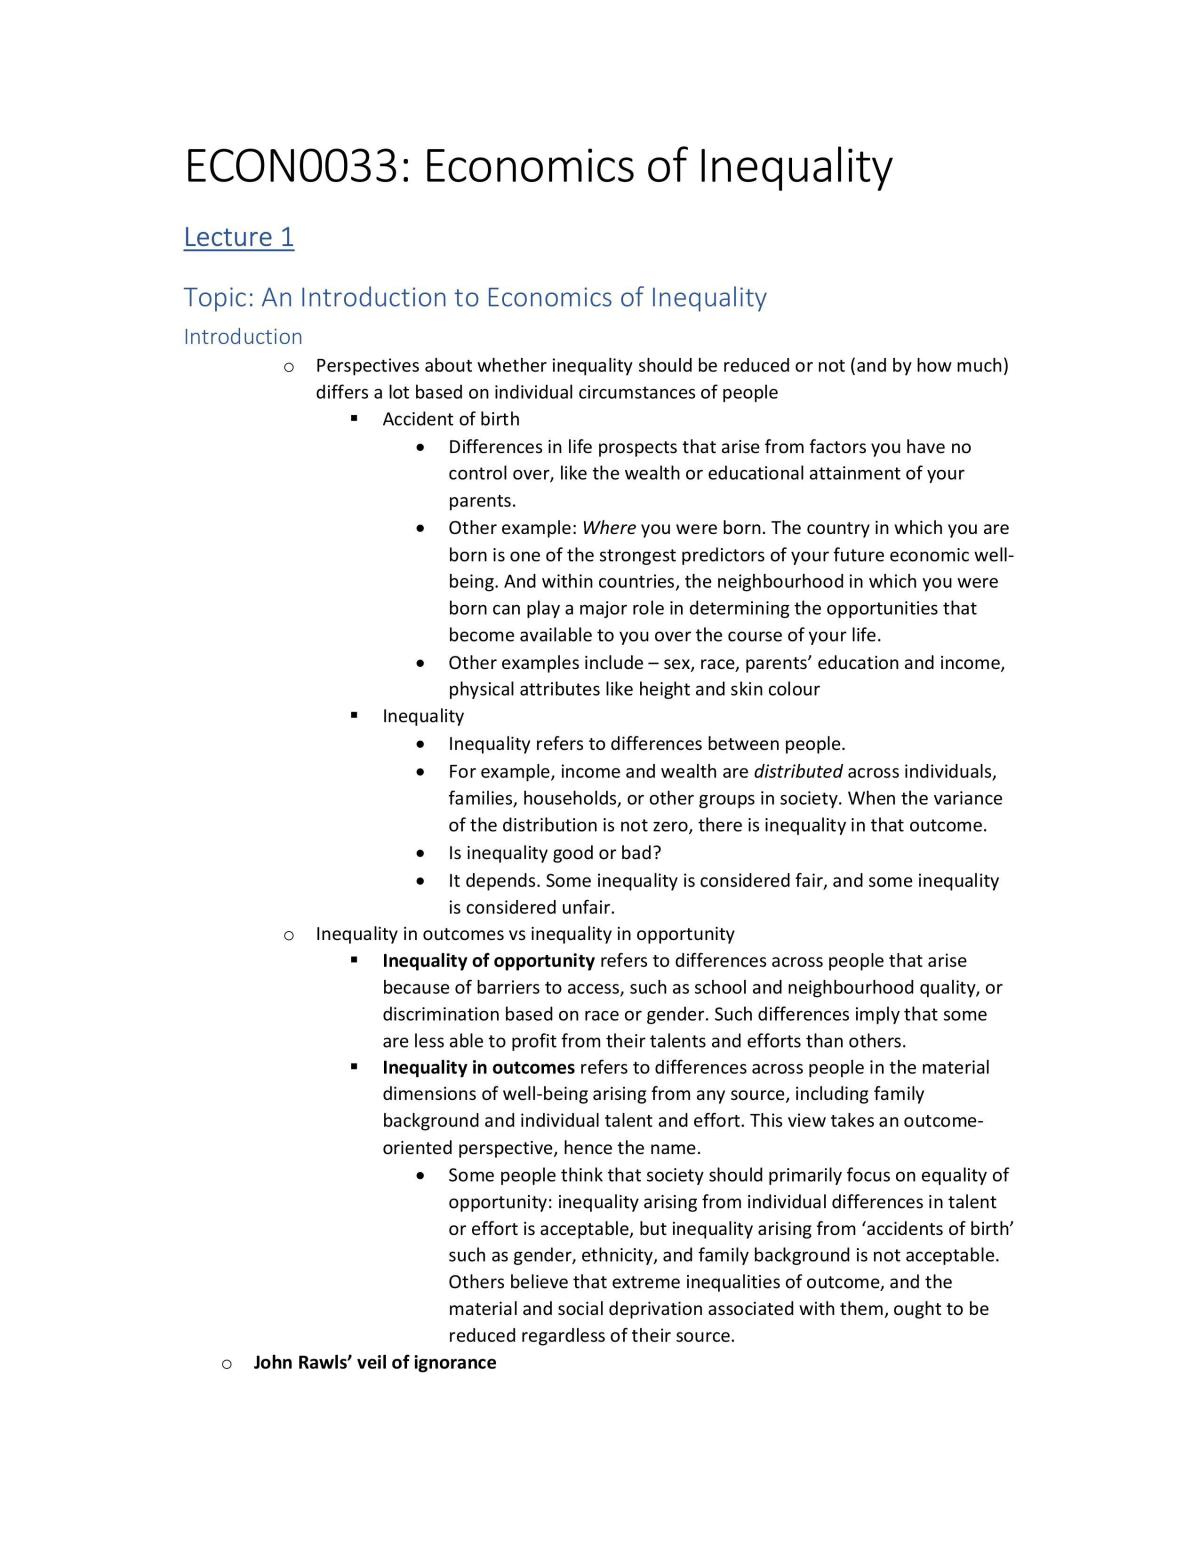 Complete notes for Economics of Inequality  - Page 1